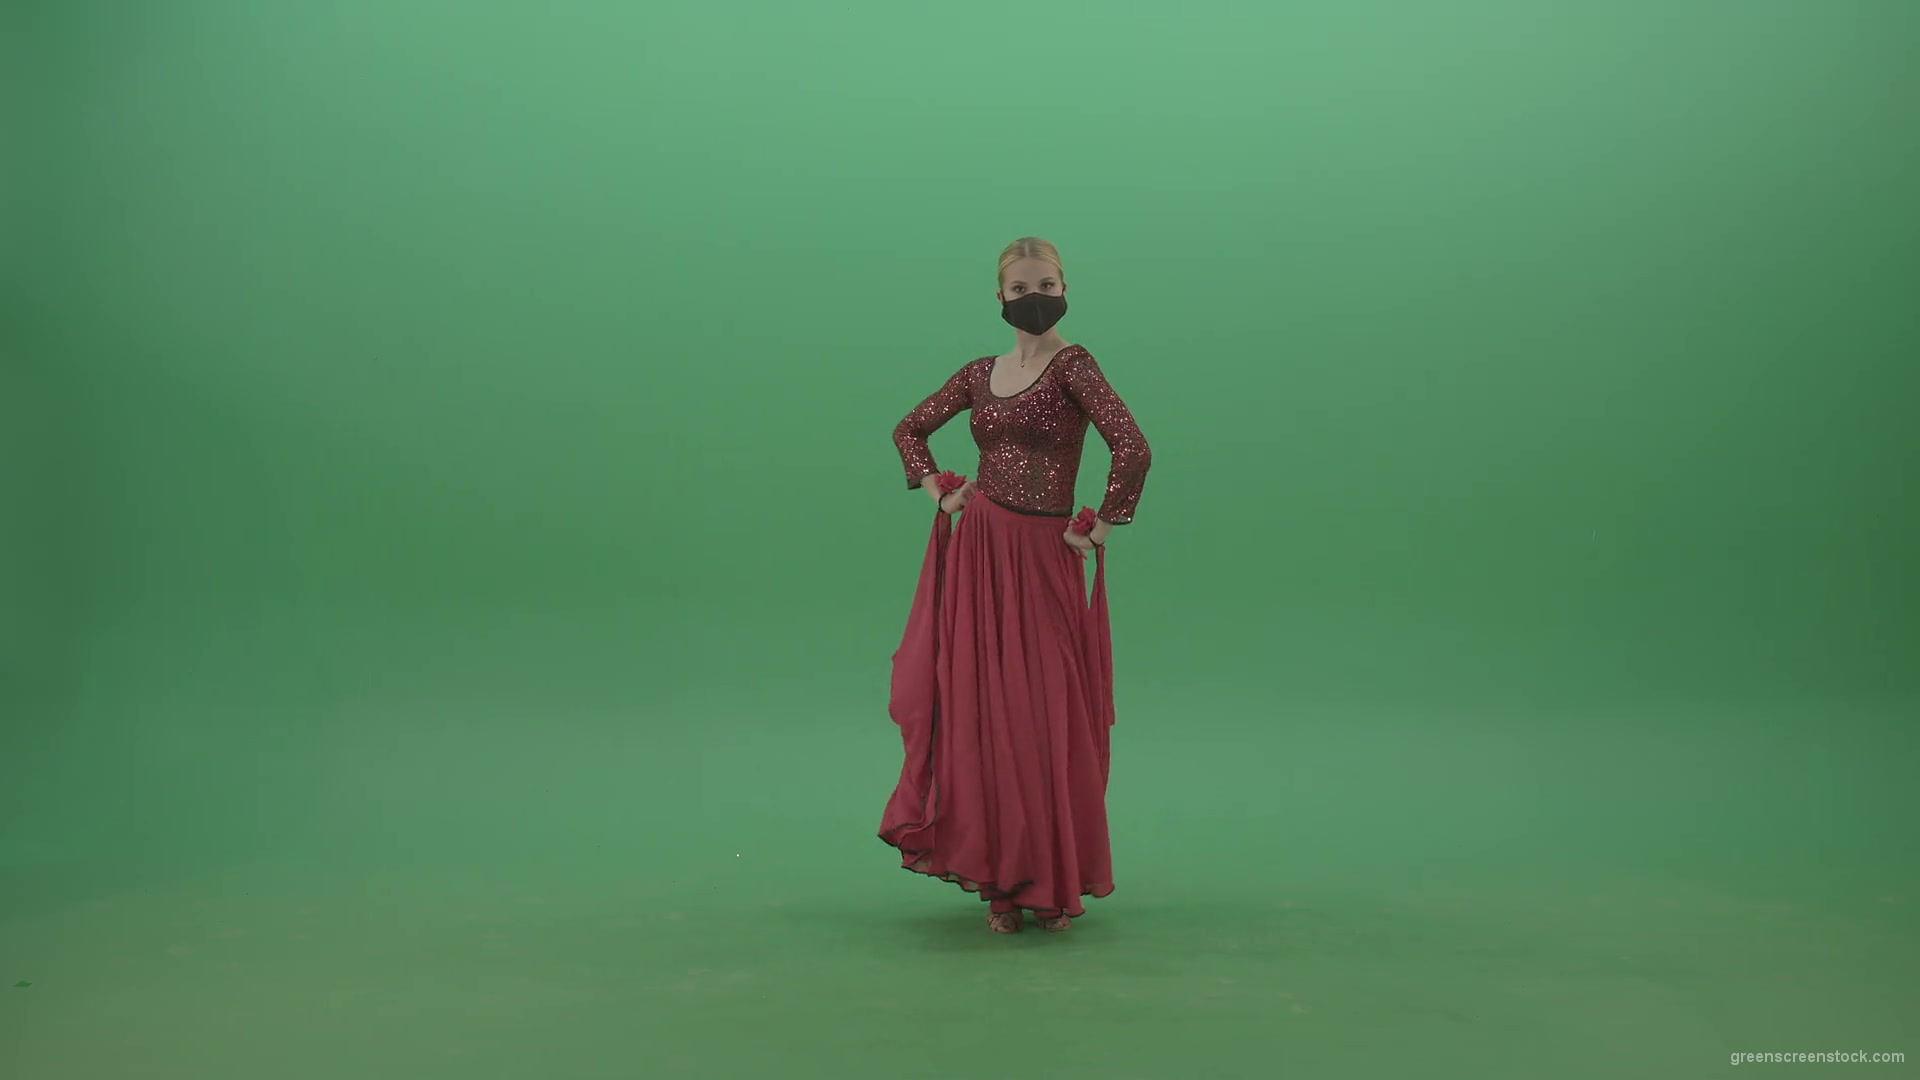 Beauty-Girl-with-black-mask-in-red-rumba-dress-waving-arms-isolated-on-green-screen-4K-Video-Footage-1920_007 Green Screen Stock